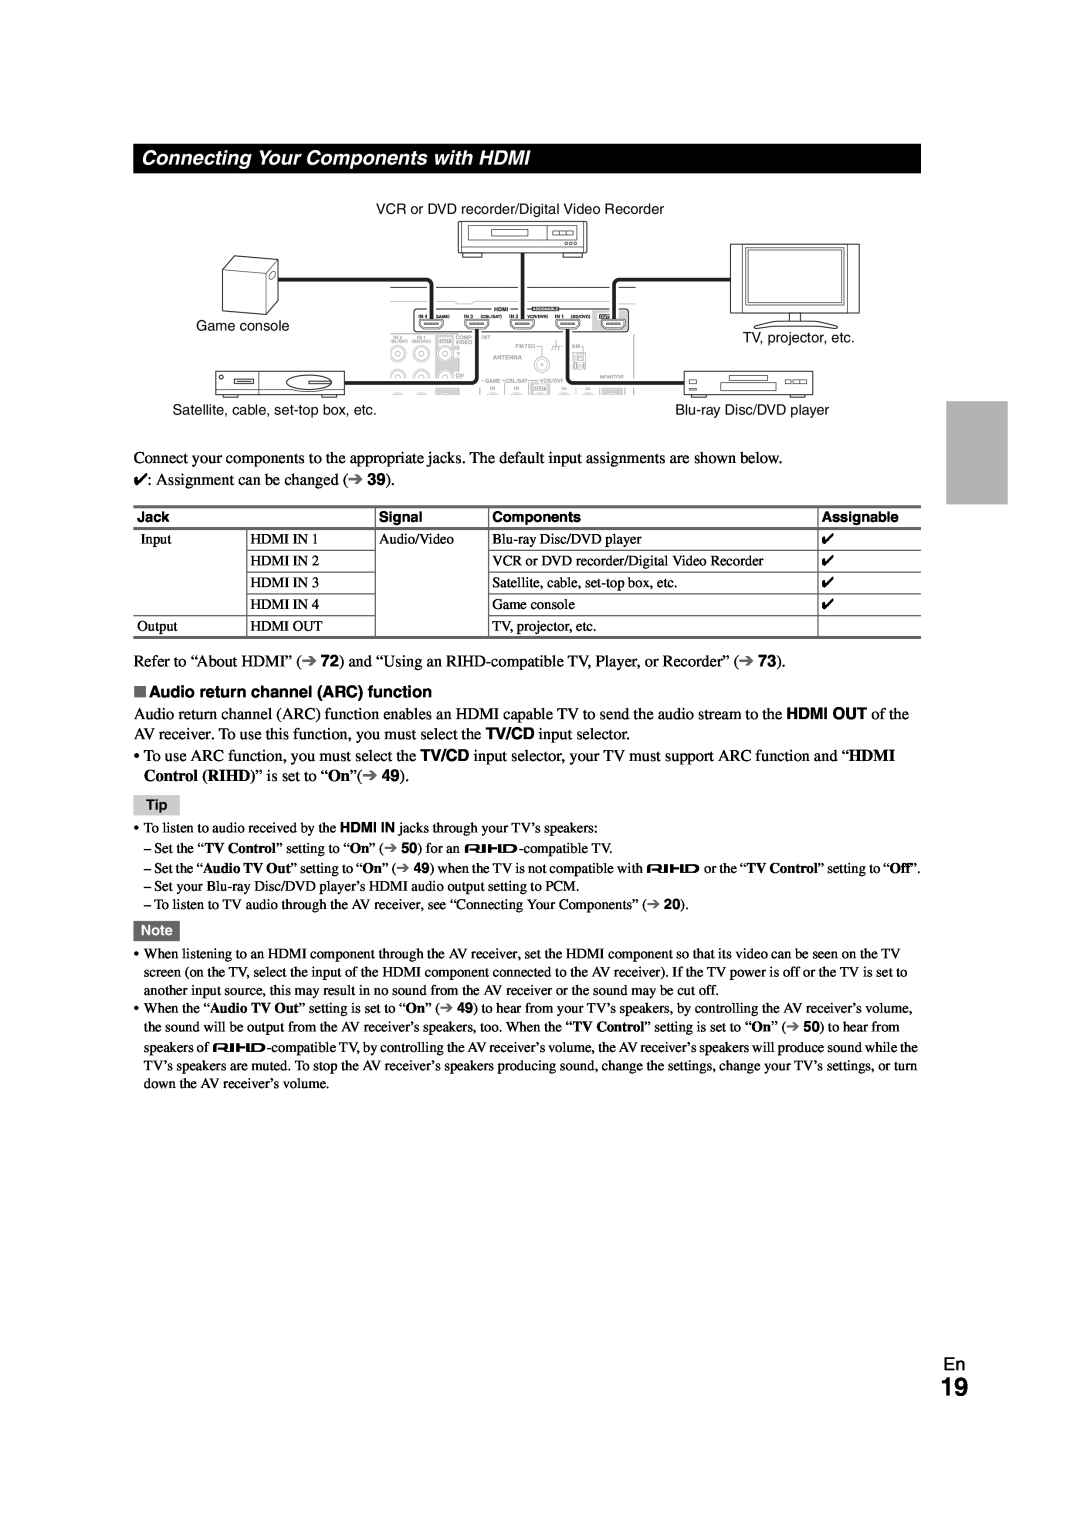 Onkyo HT-S7300 instruction manual Connecting Your Components with HDMI, Audio return channel ARC function 